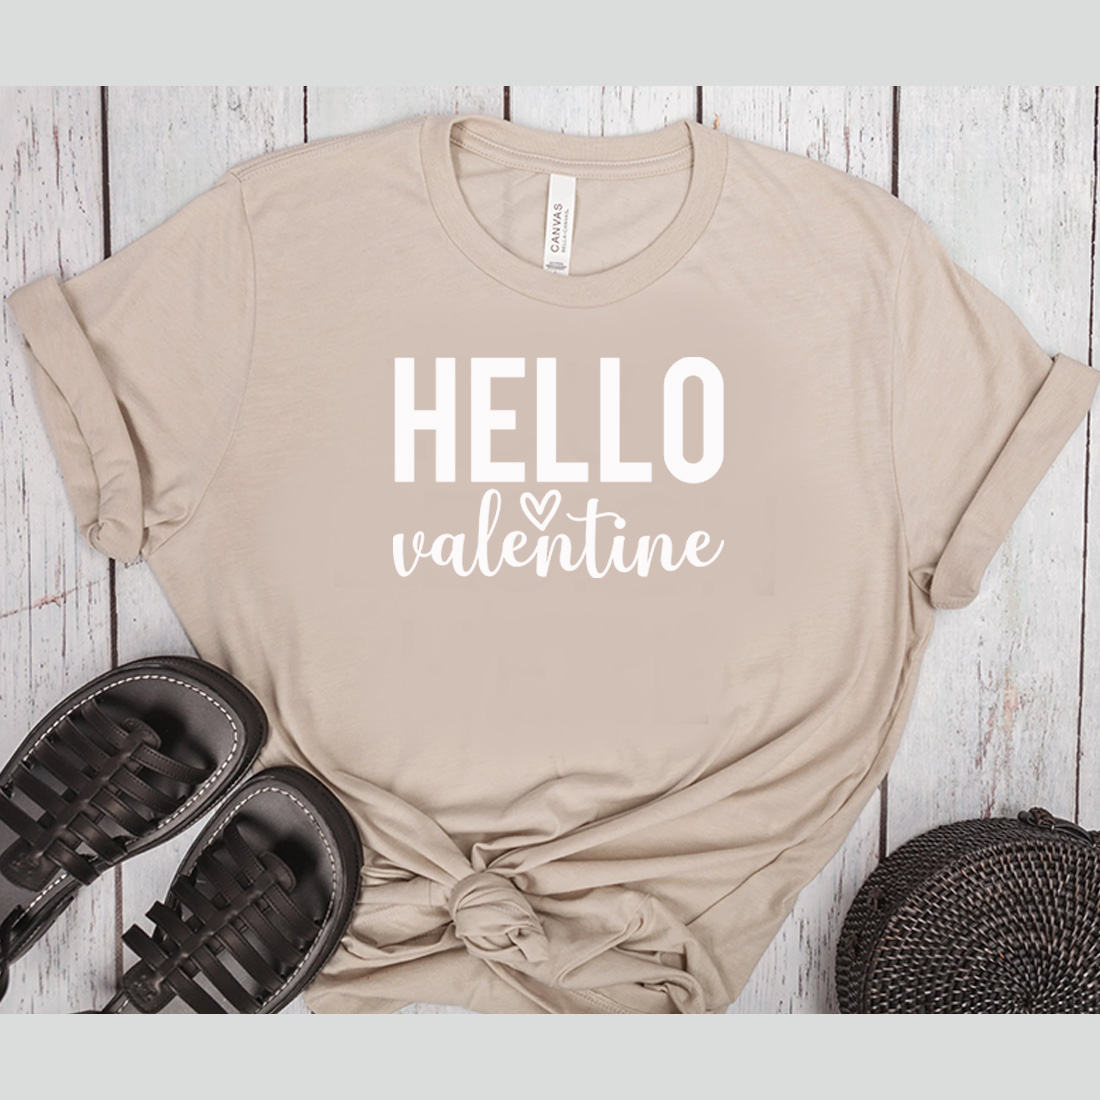 Image of t-shirt with elegant Hello Valentine lettering